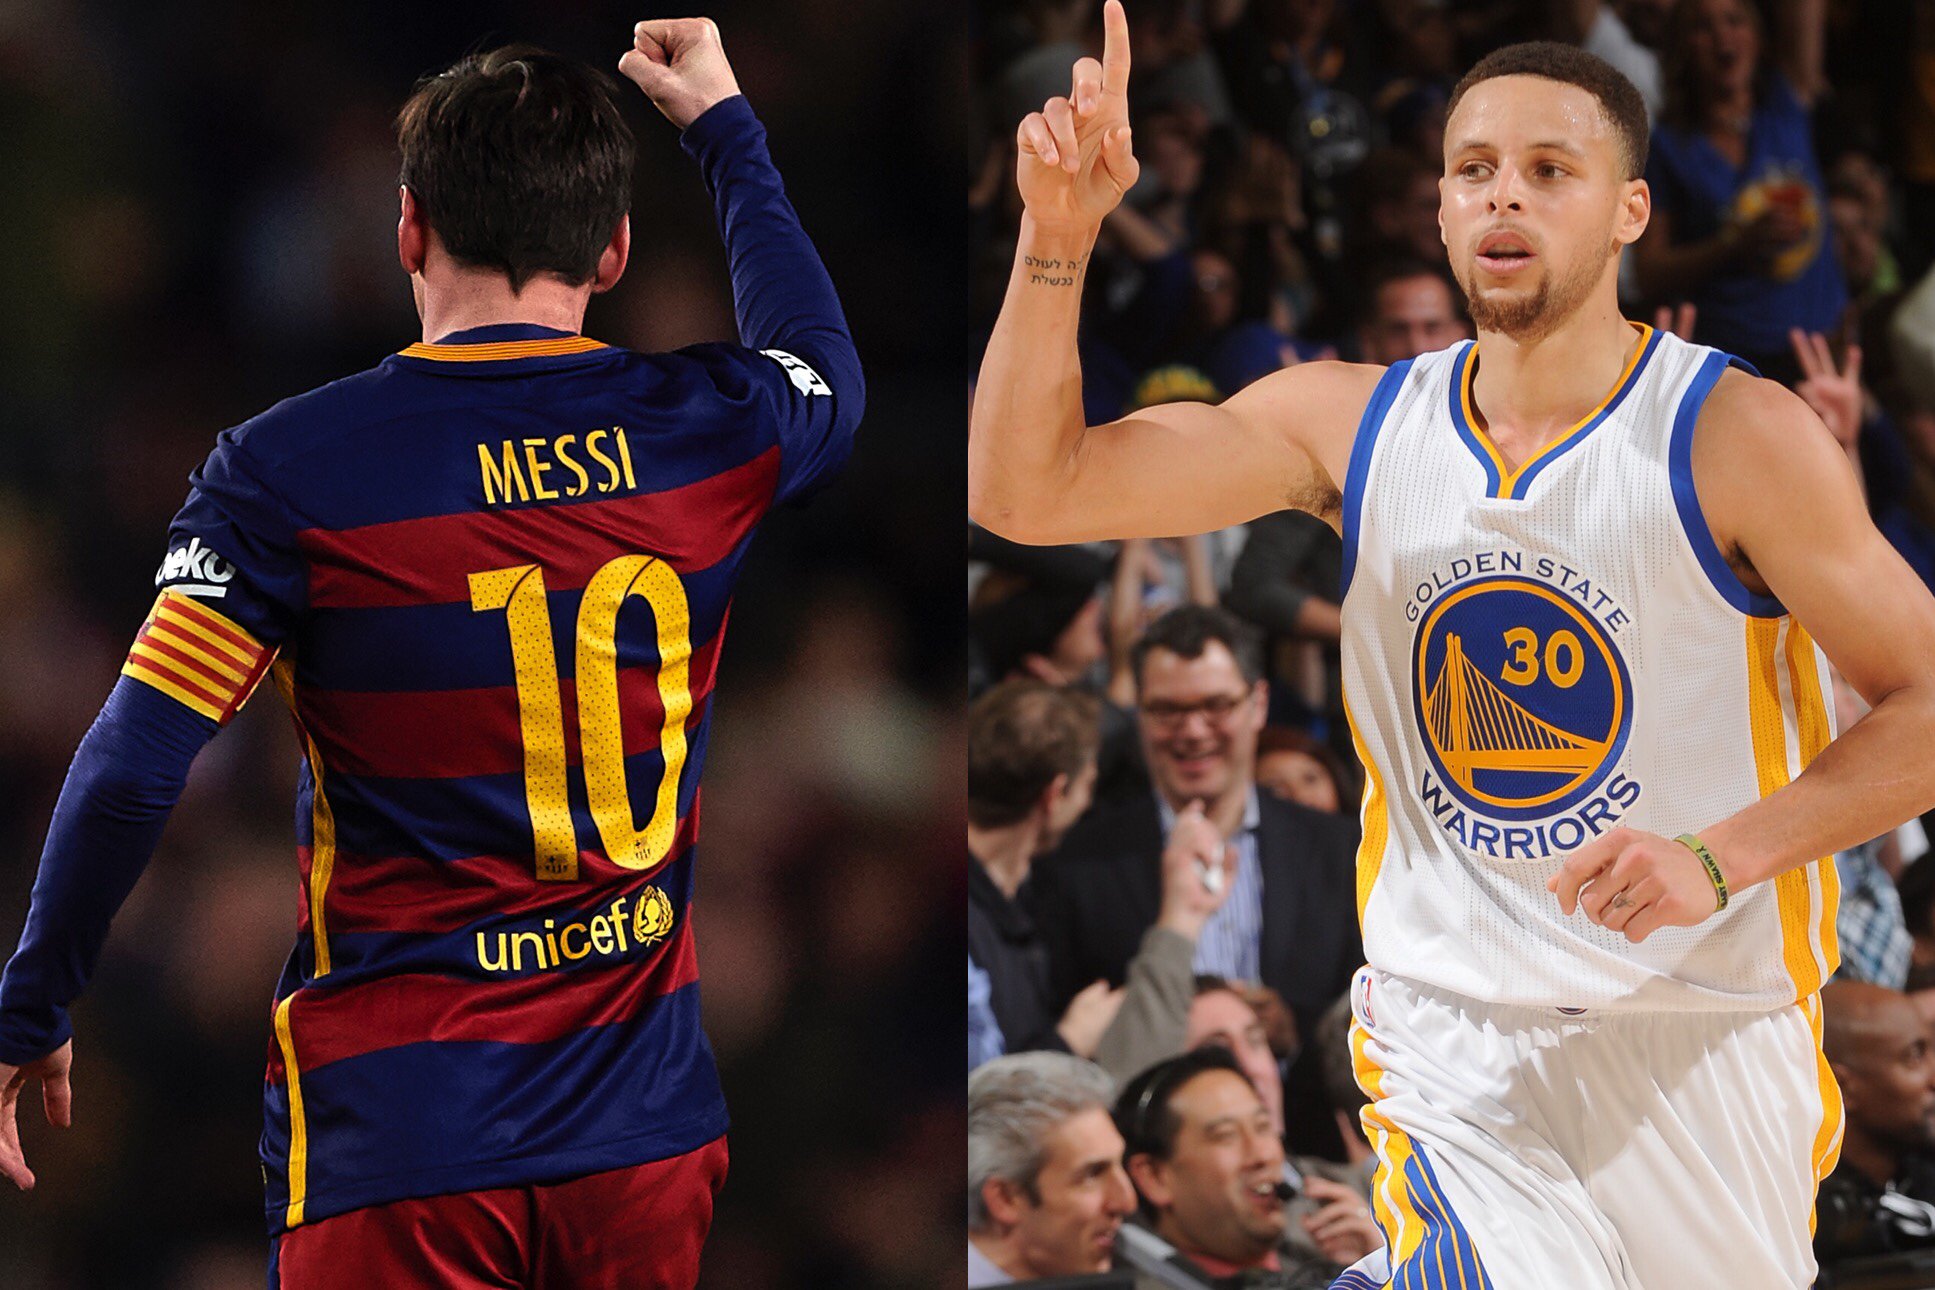 Steph Curry to bring 'Messi mindset' as he uses soccer-style shin